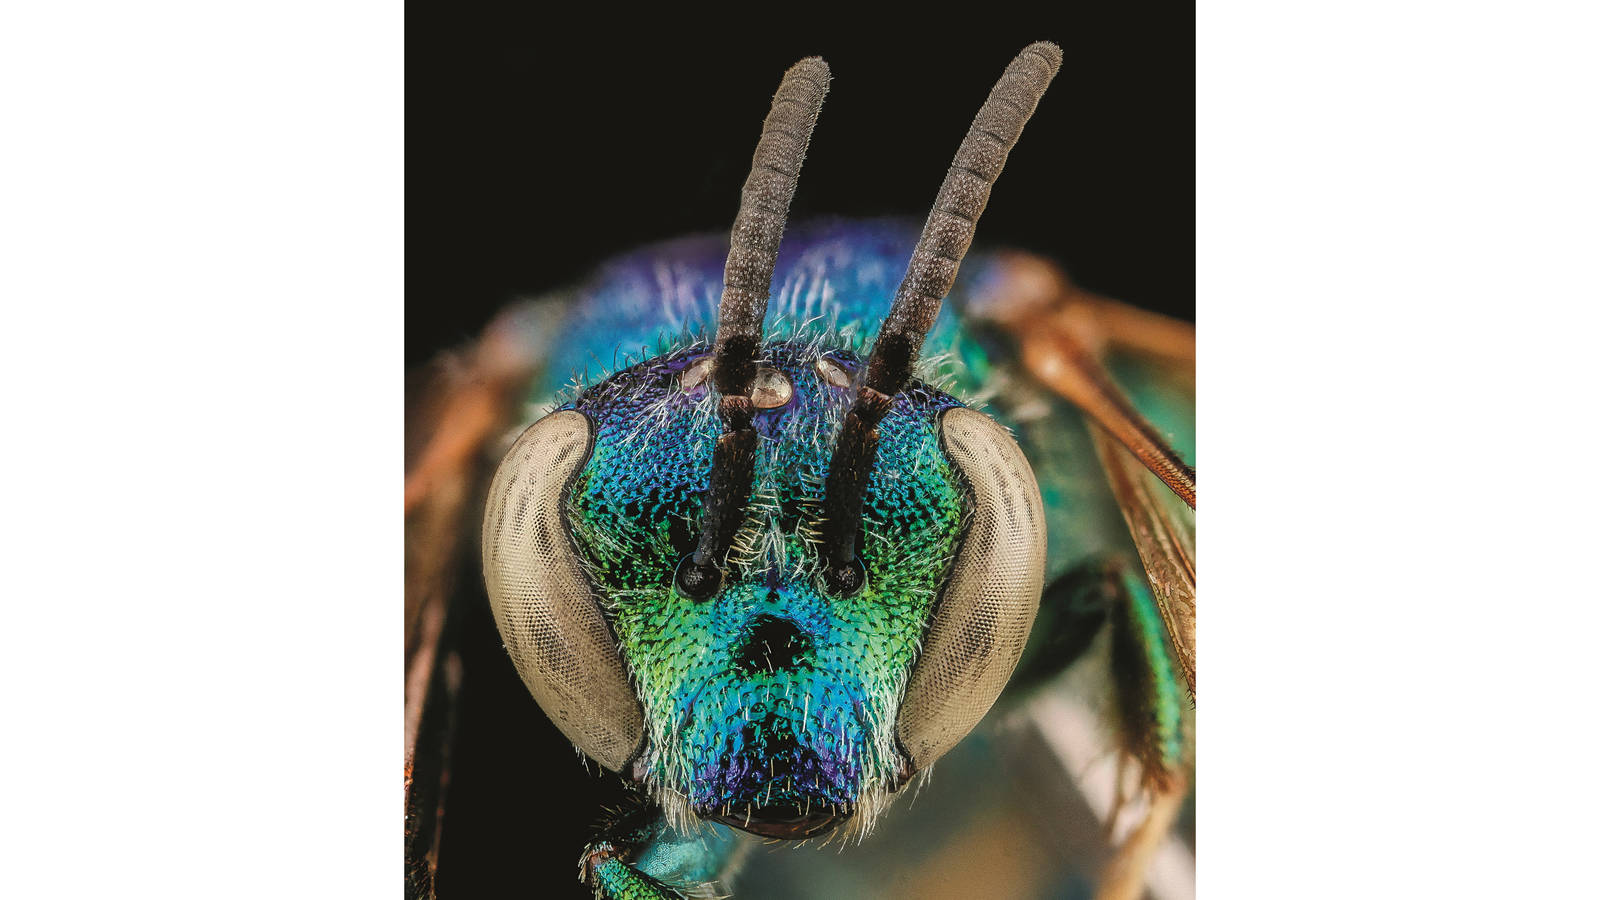 <h3 style="text-align: center; padding: 50px;"><span class="text-Intro-style"><em>Augochloropsis anonyma</em> (bee), Biscayne National Park, Florida. © SAM DROEGE/USGS BEE INVENTORY AND MONITORING LAB</span></h3>